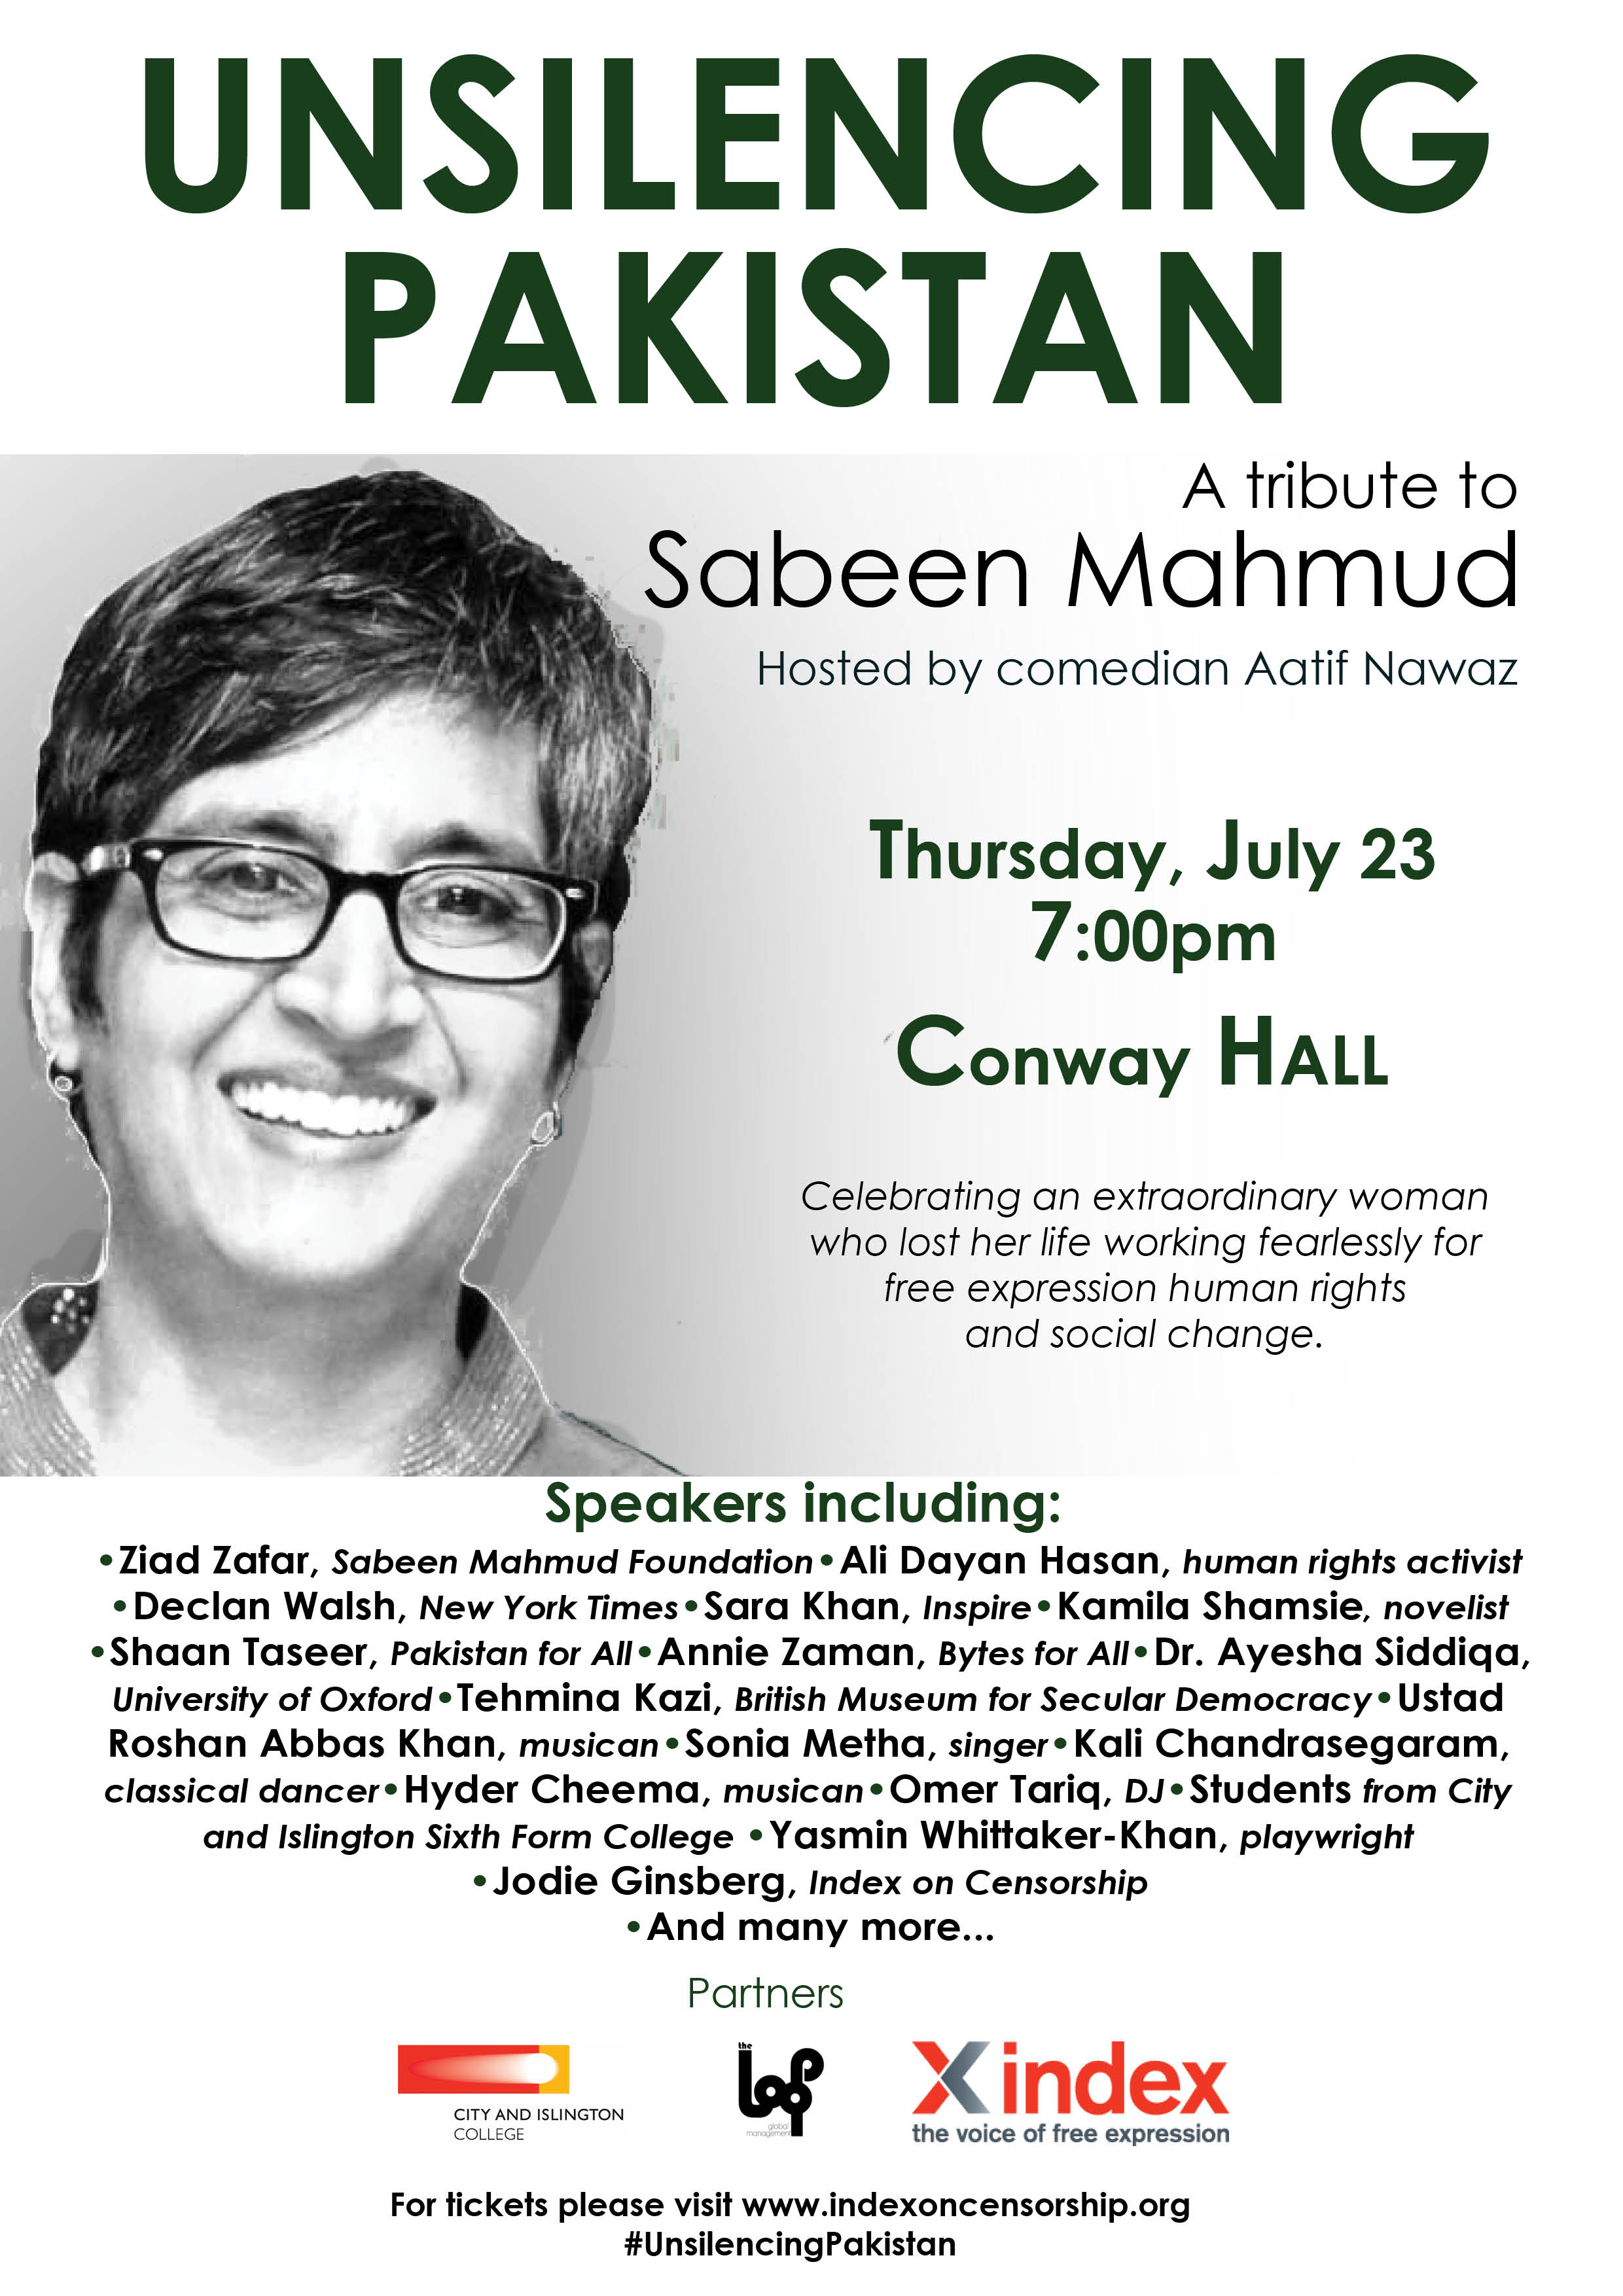 23 July: Unsilencing Pakistan — a tribute to Sabeen Mahmud